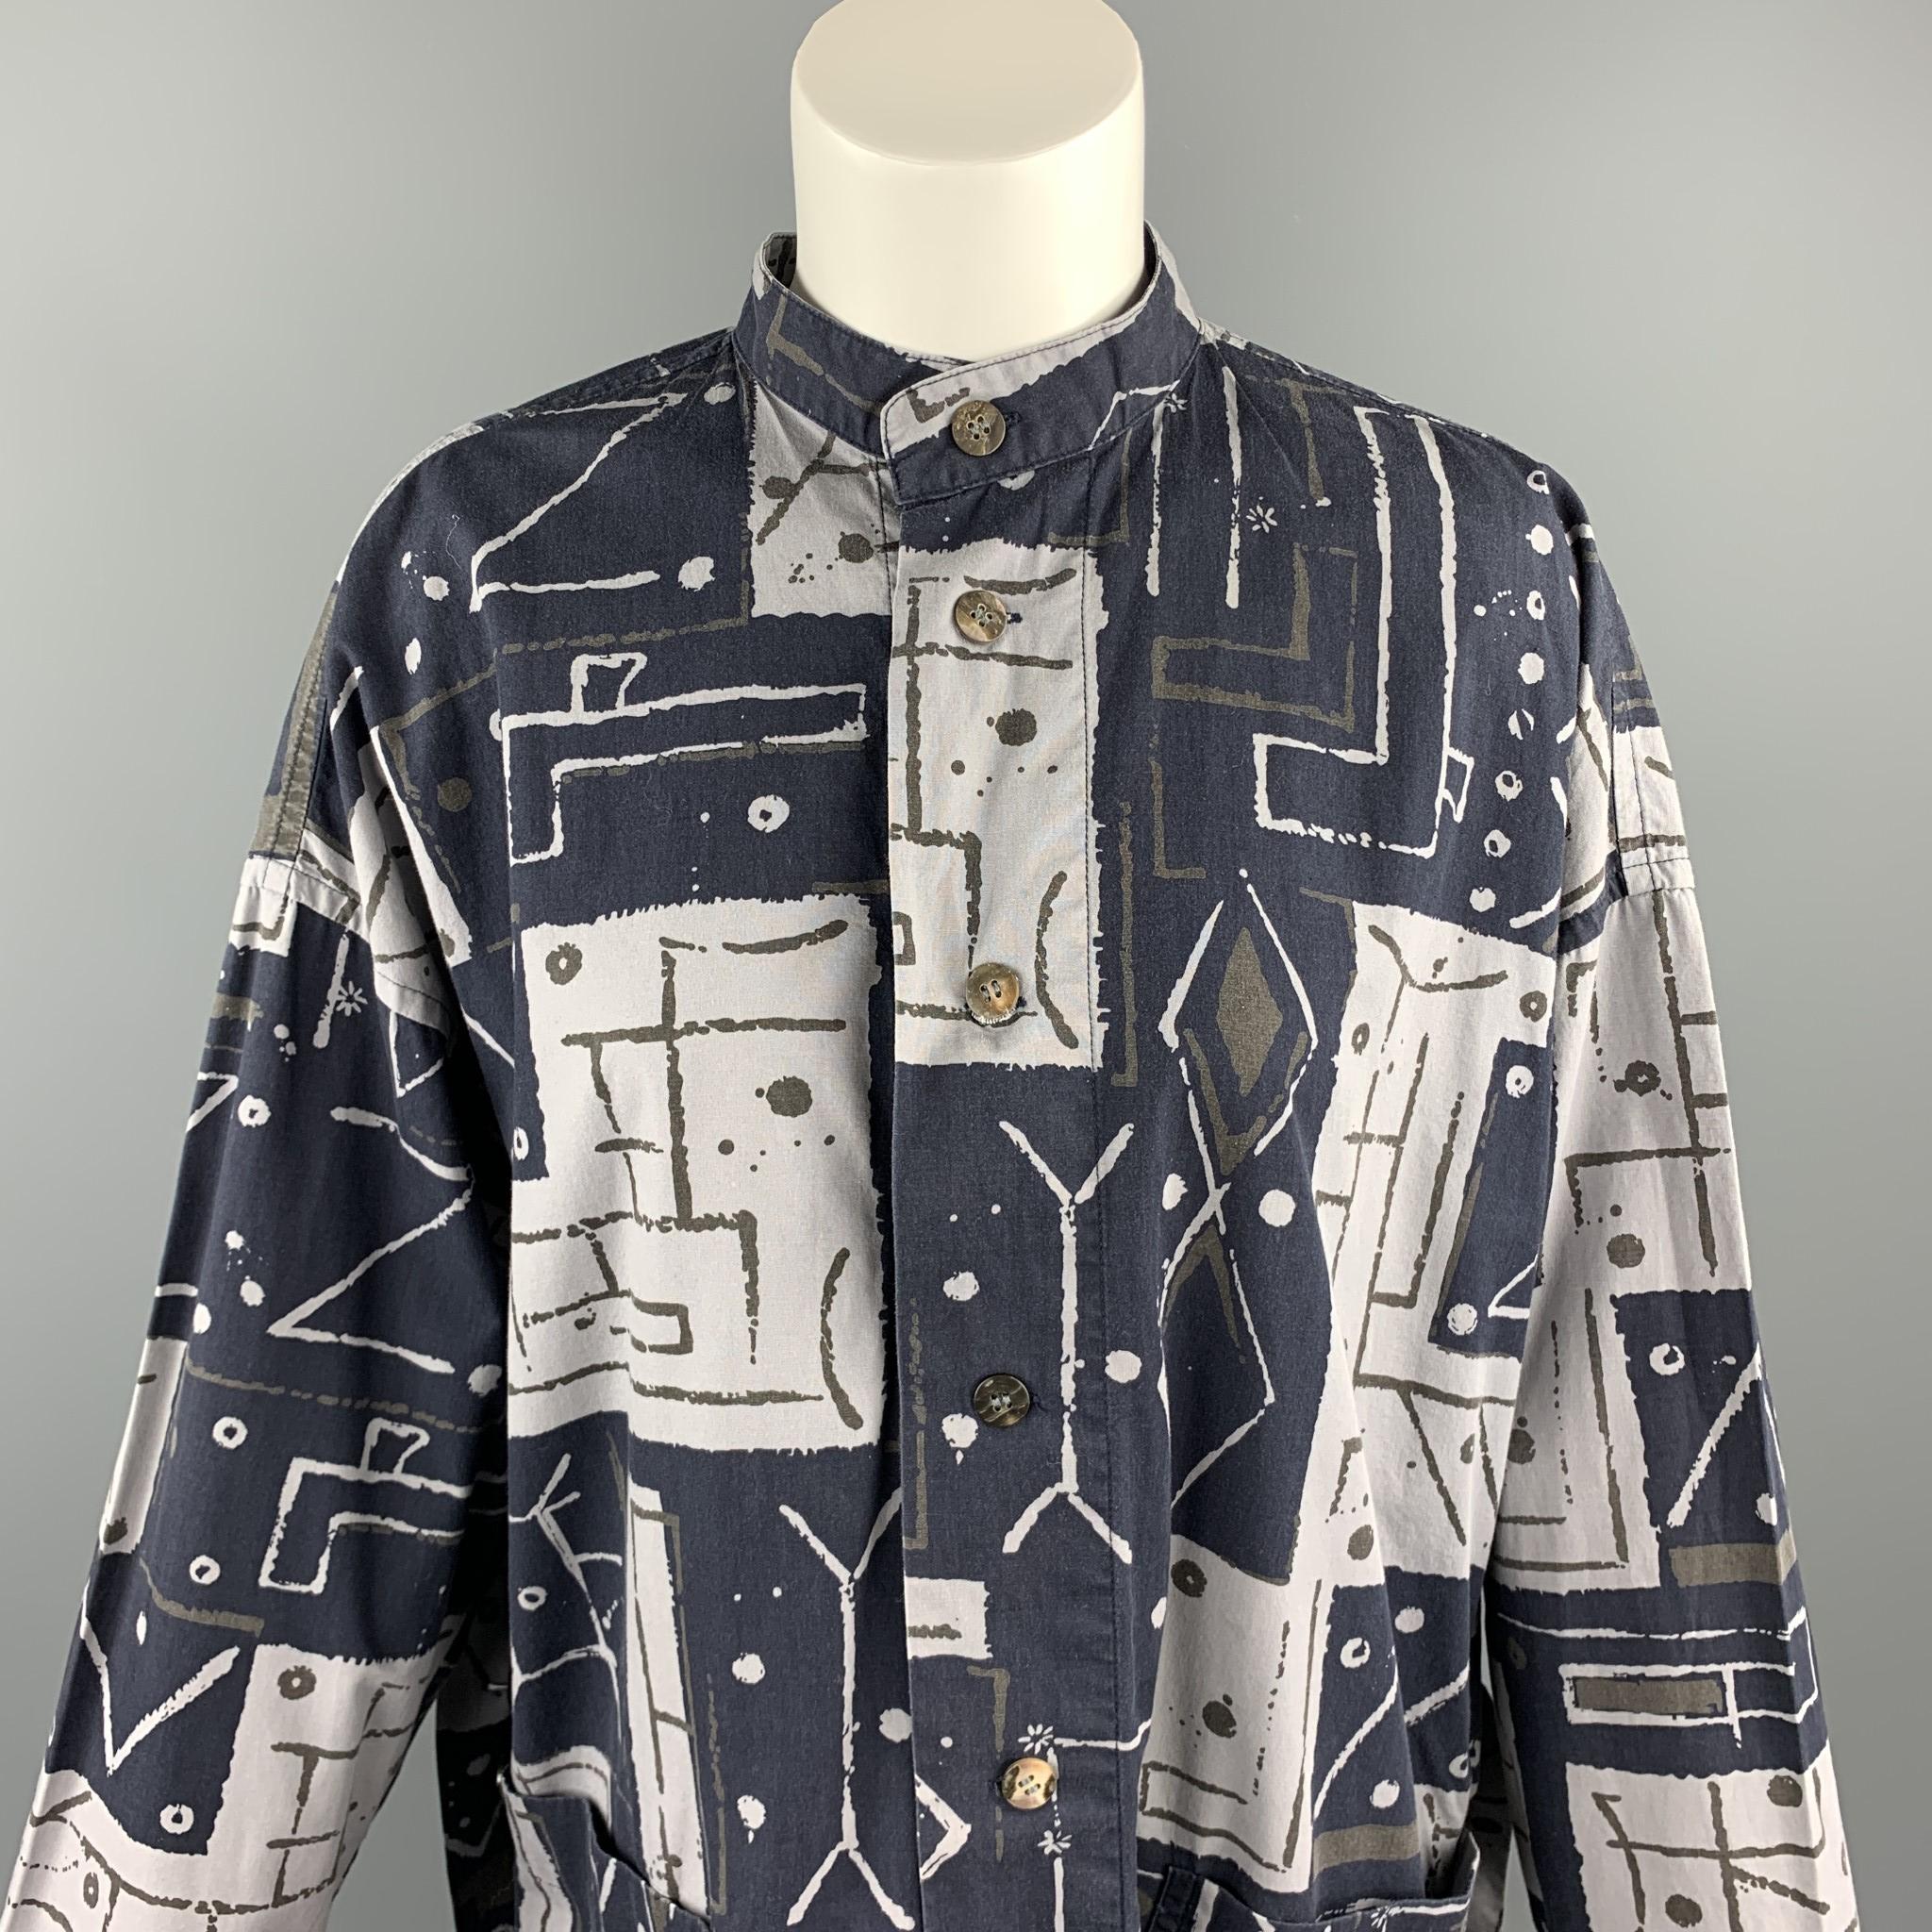 PLANTATION by ISSEY MIYAKE oversized shirt jacket comes in all over printed cotton linen blend with a band collar, batwing sleeves, and patch pockets. 

Very Good Pre-Owned Condition.
Marked: XS

Measurements:

Shoulder: 25 in.
Chest: 58 in.
Sleeve: